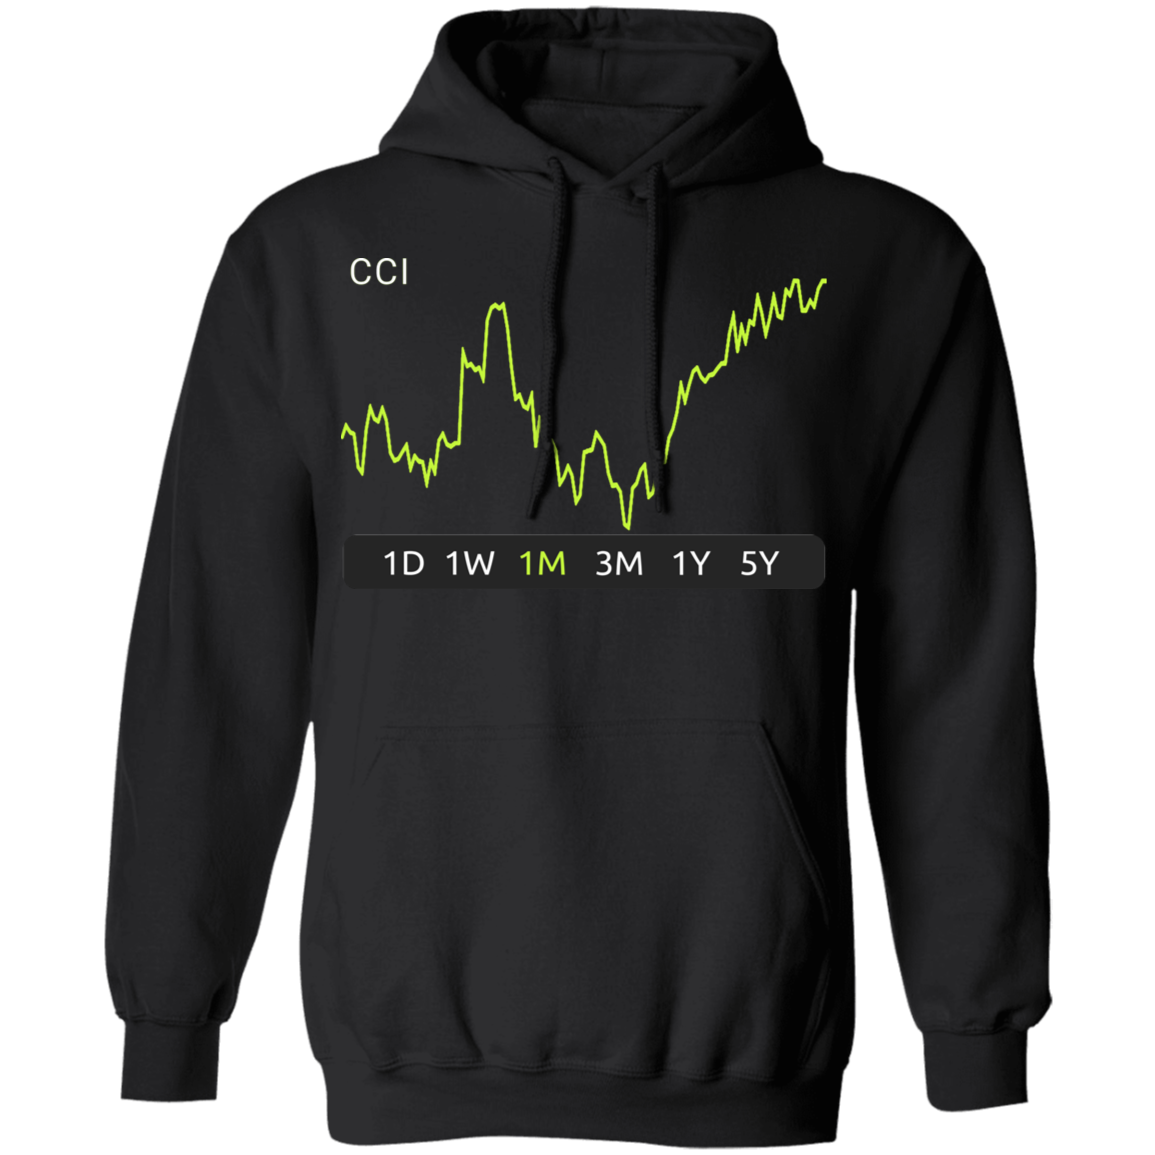 CCI Stock 1m Pullover Hoodie